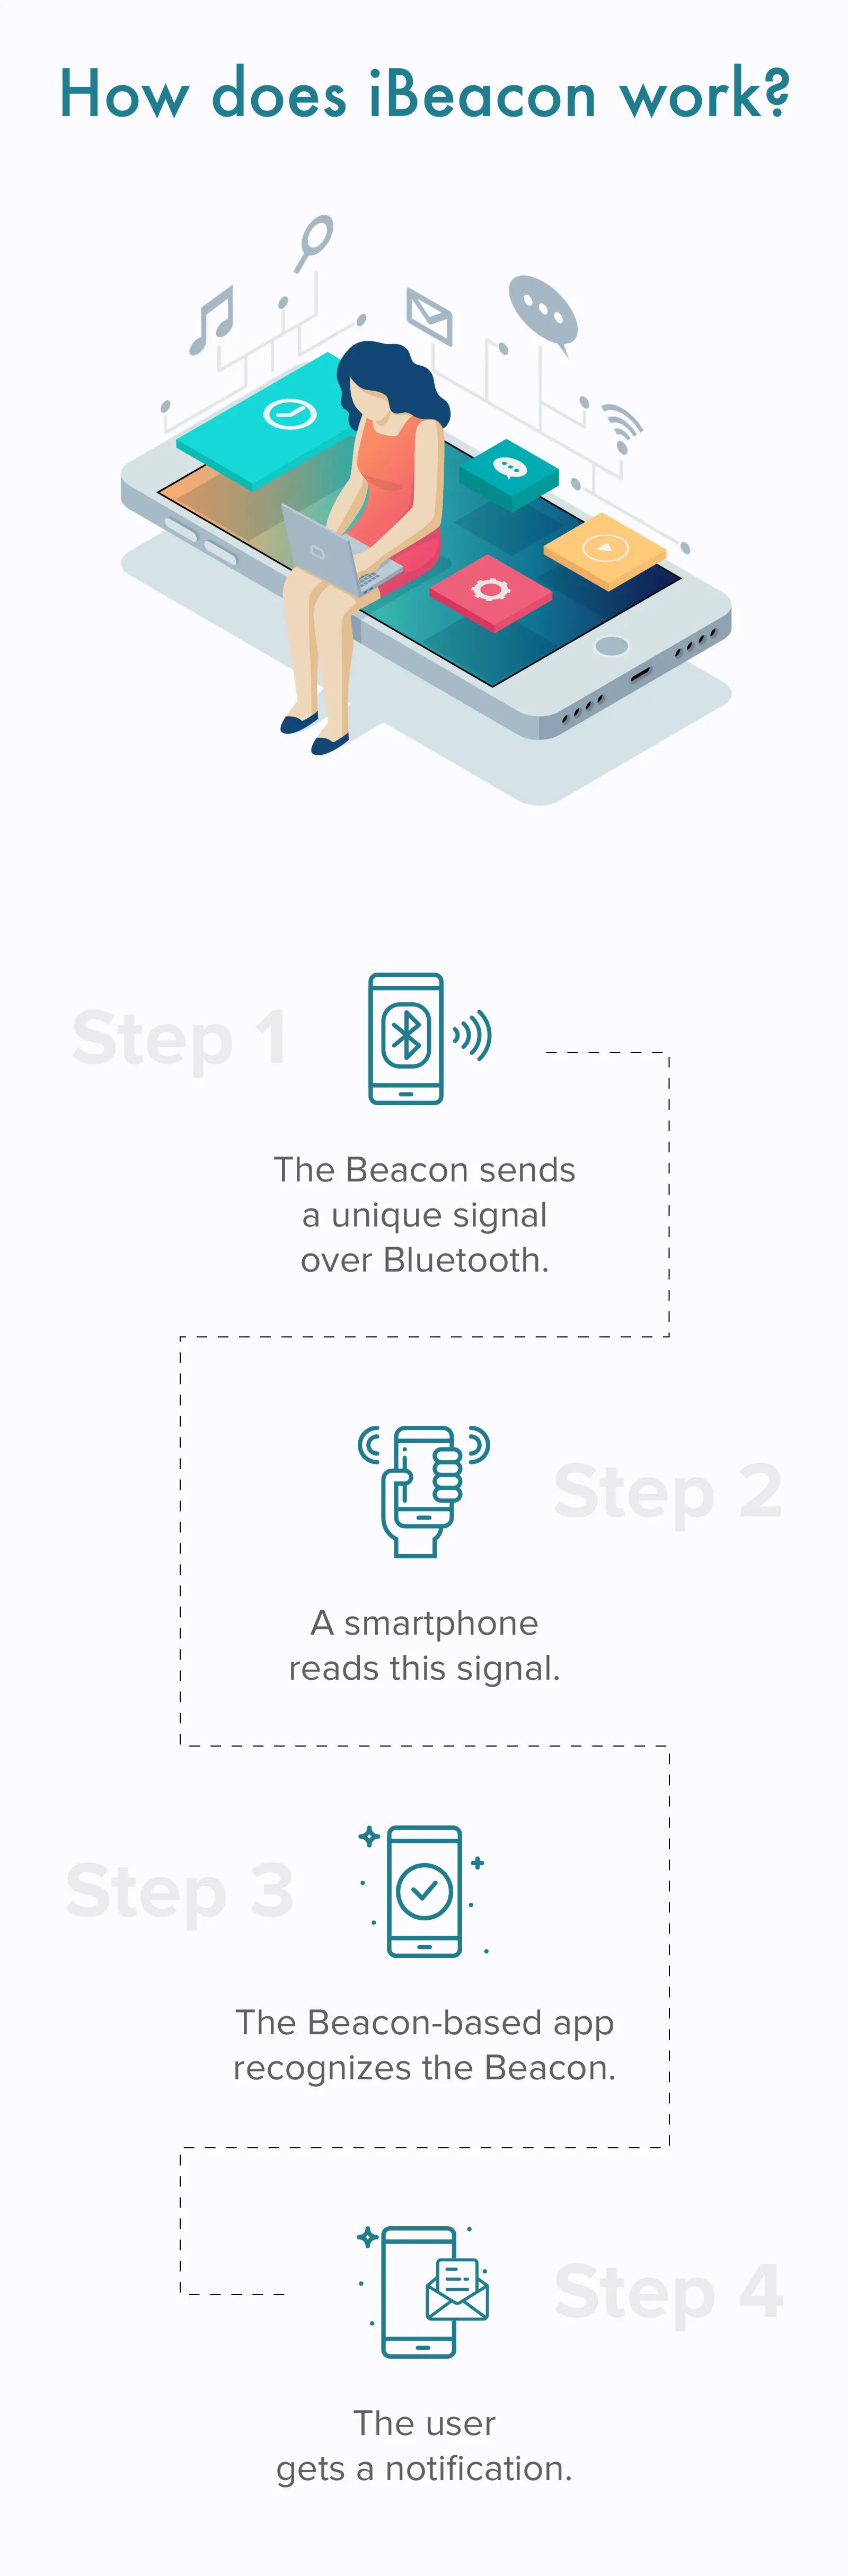 iBeacon and how it works